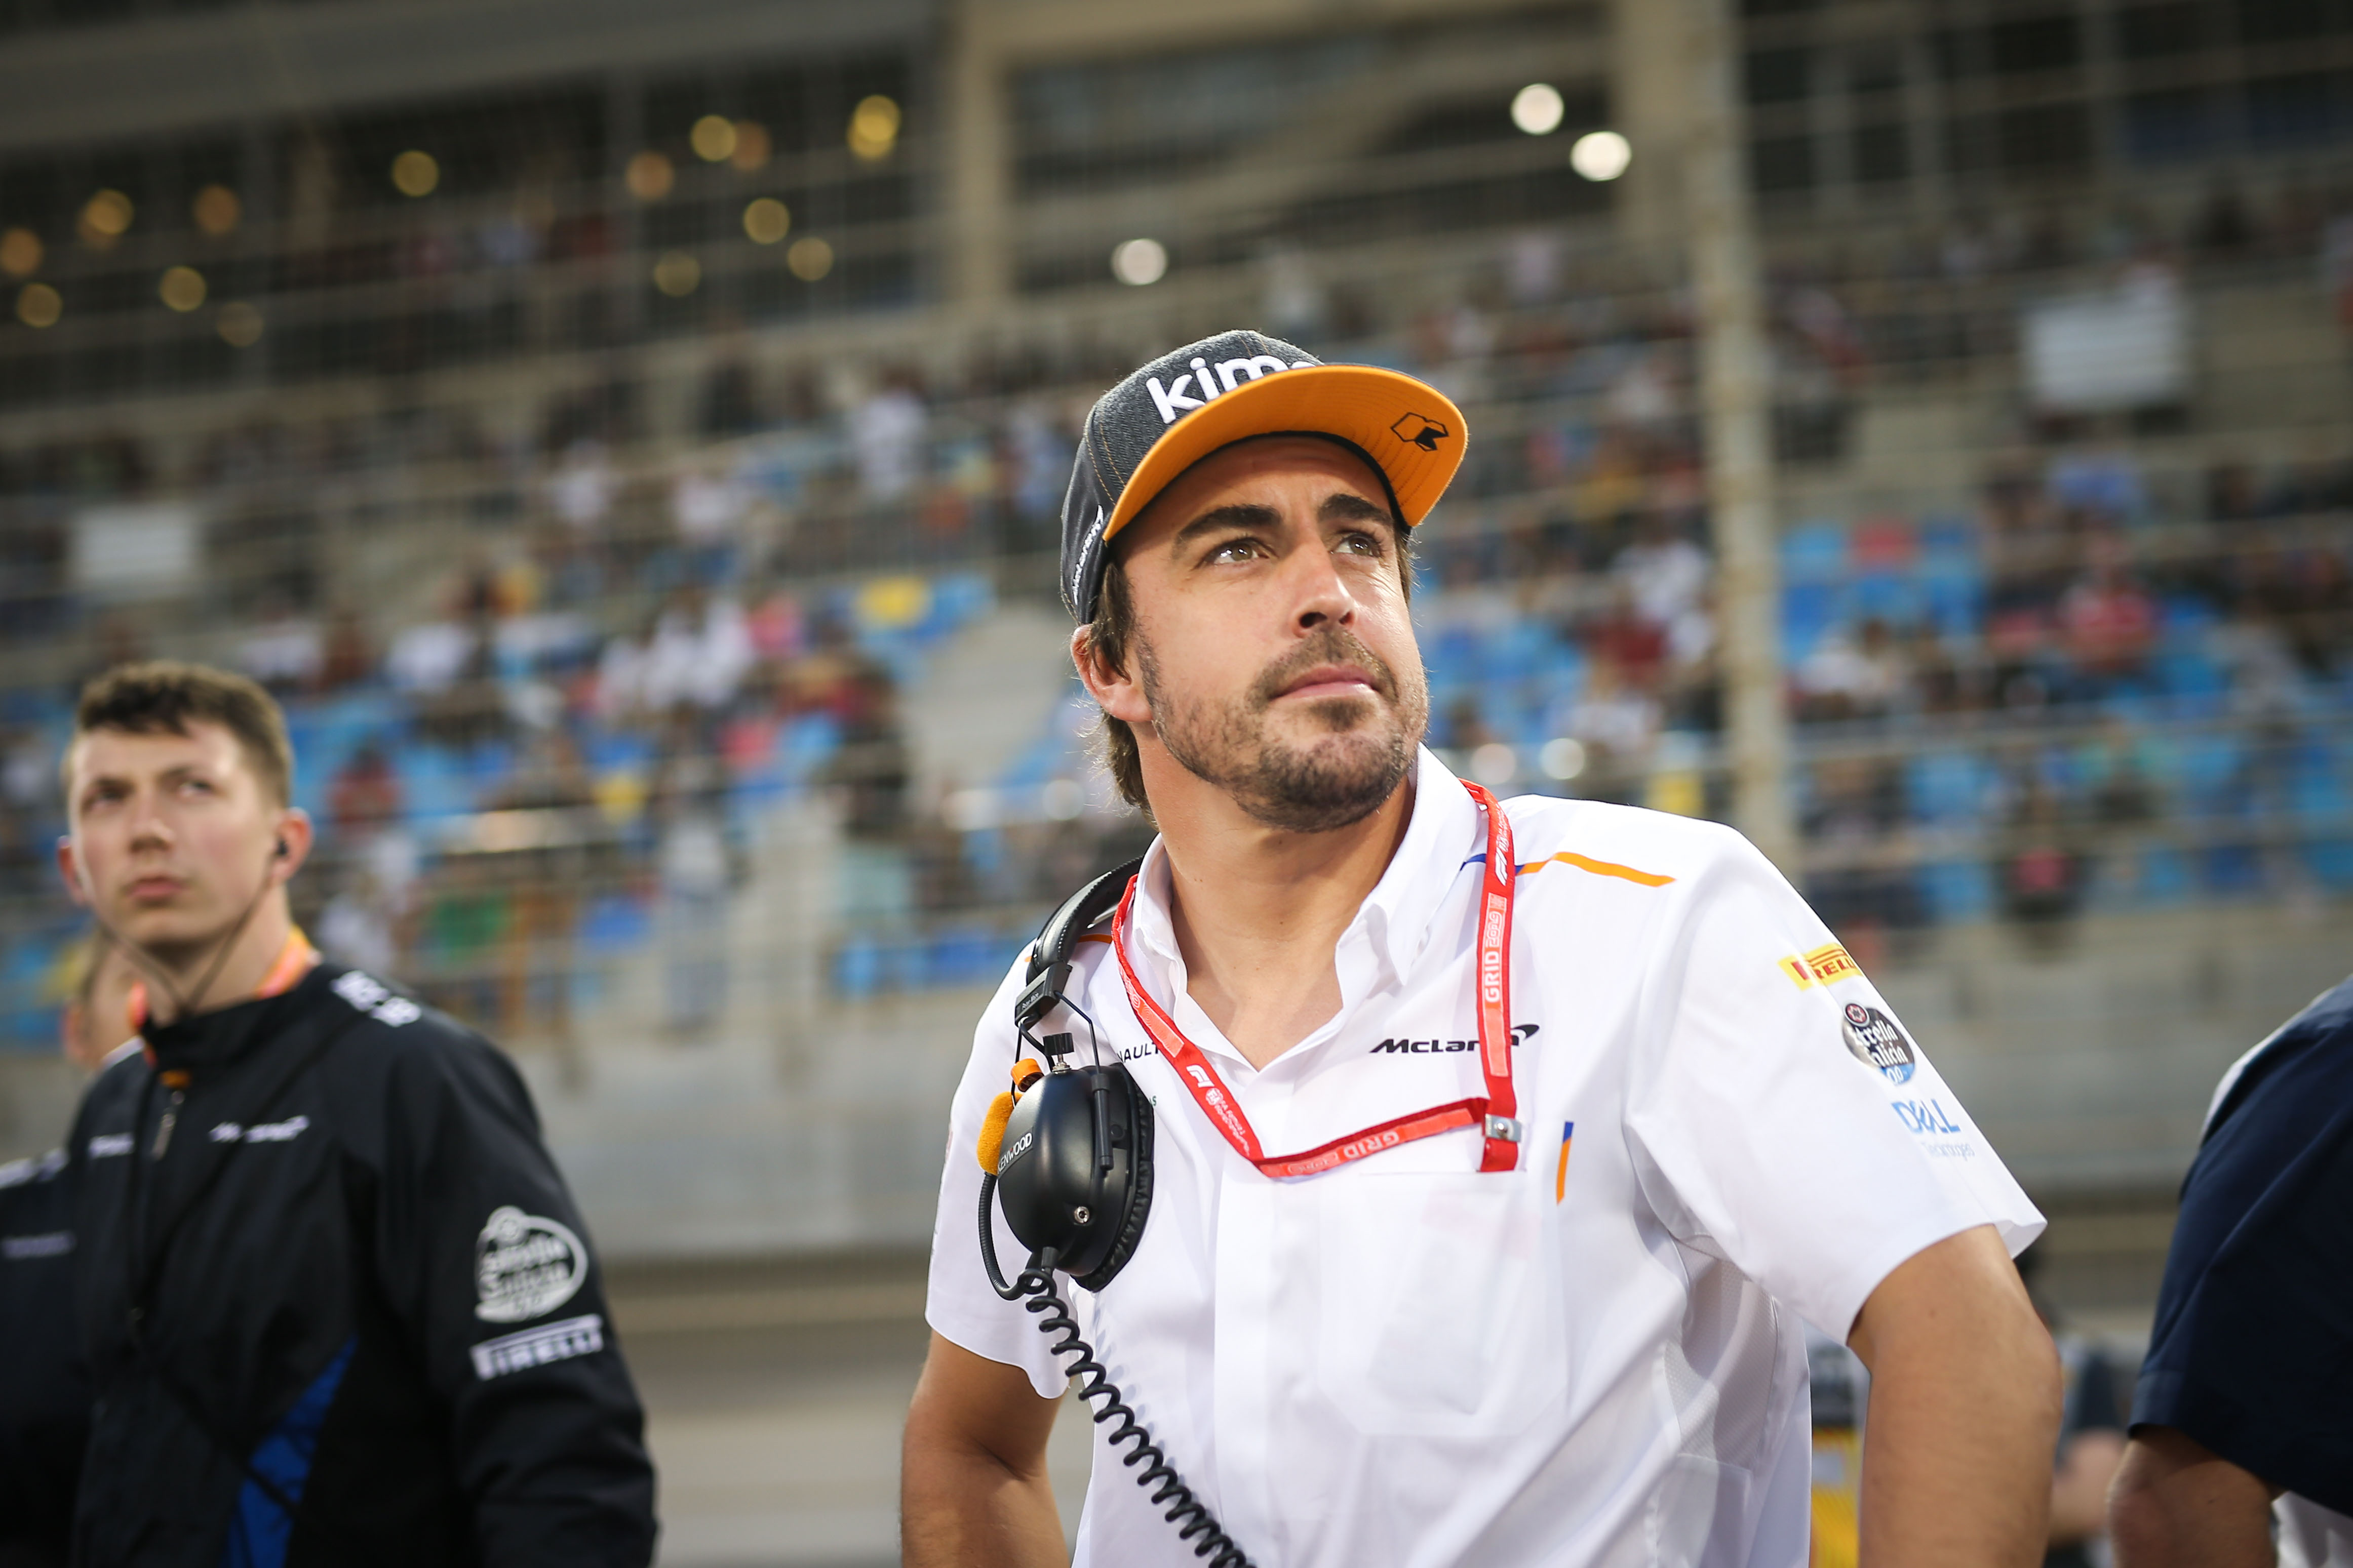 Fernando Alonso Returns to F1, Joins Renault For 2021 Season ...